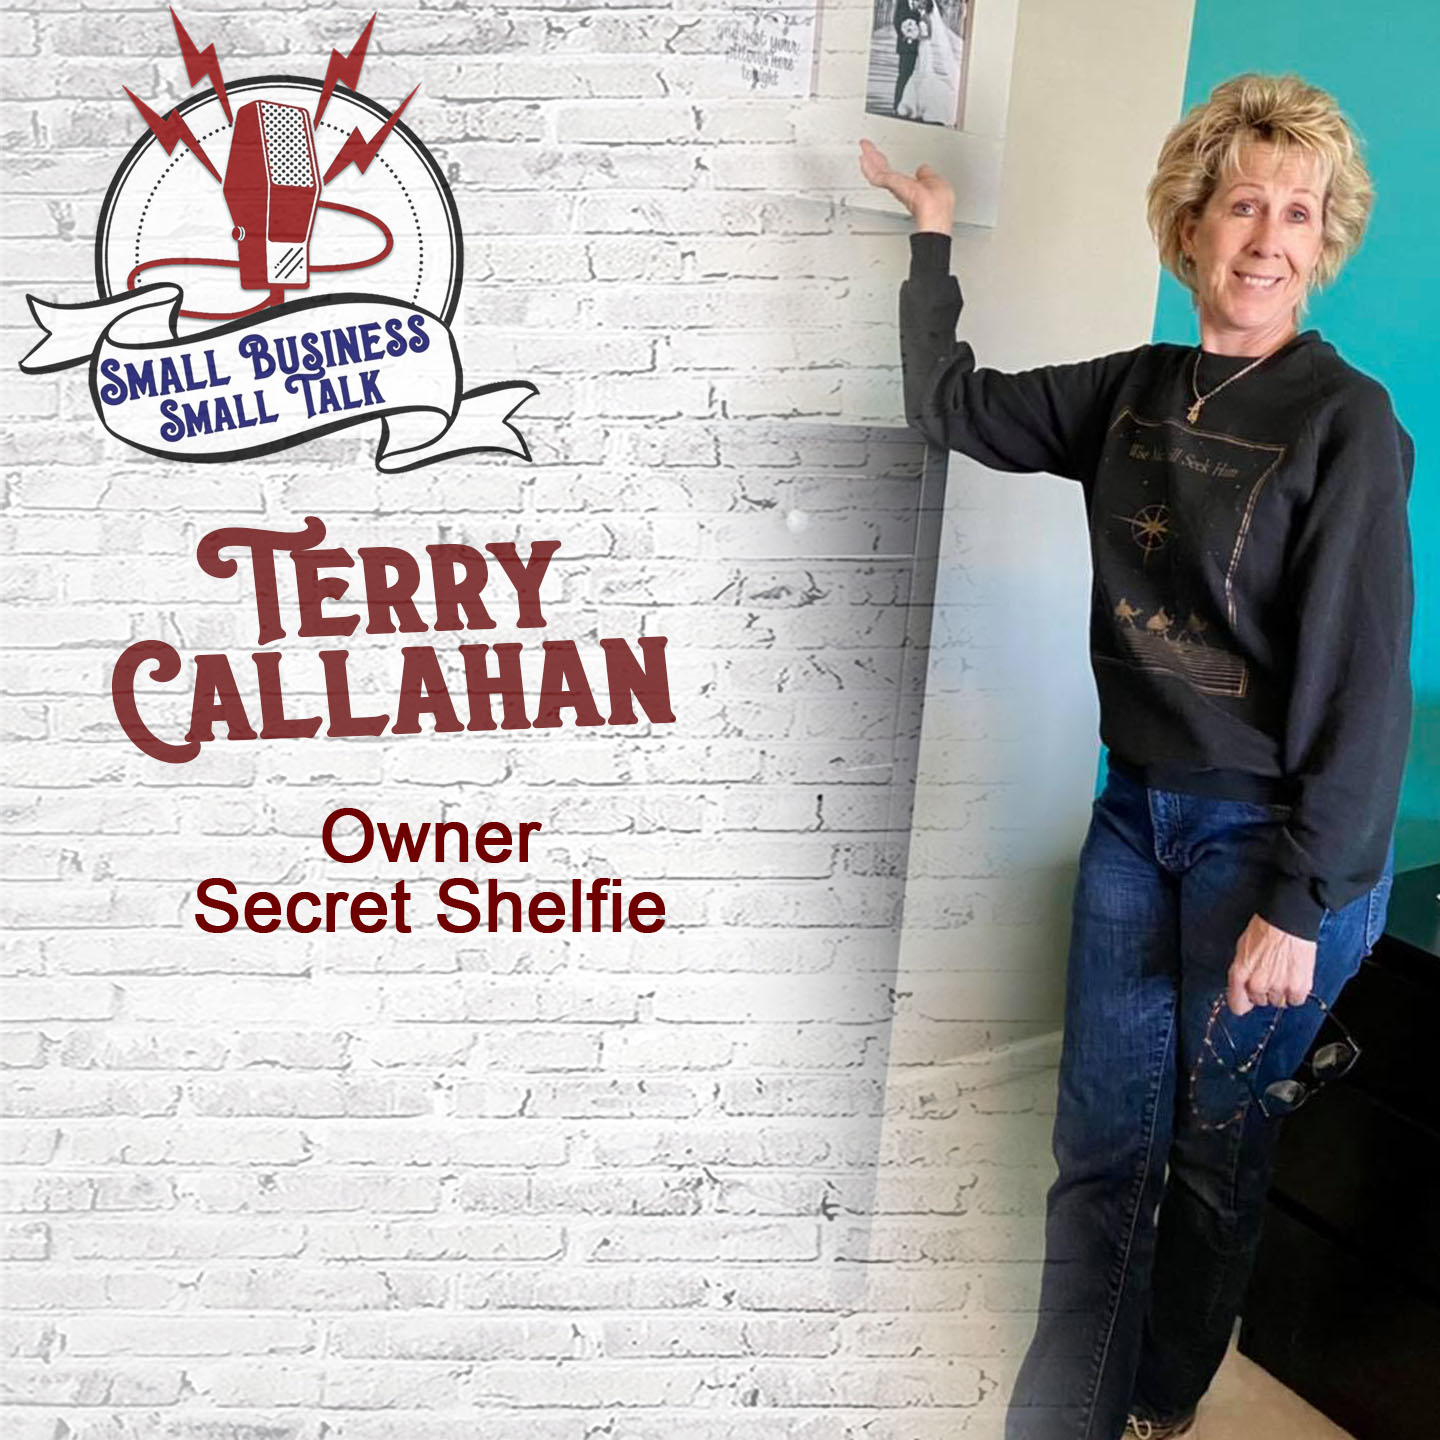 Reinventing Yourself & Staying Organized with Terry Callahan, Owner of Secret Shelfie